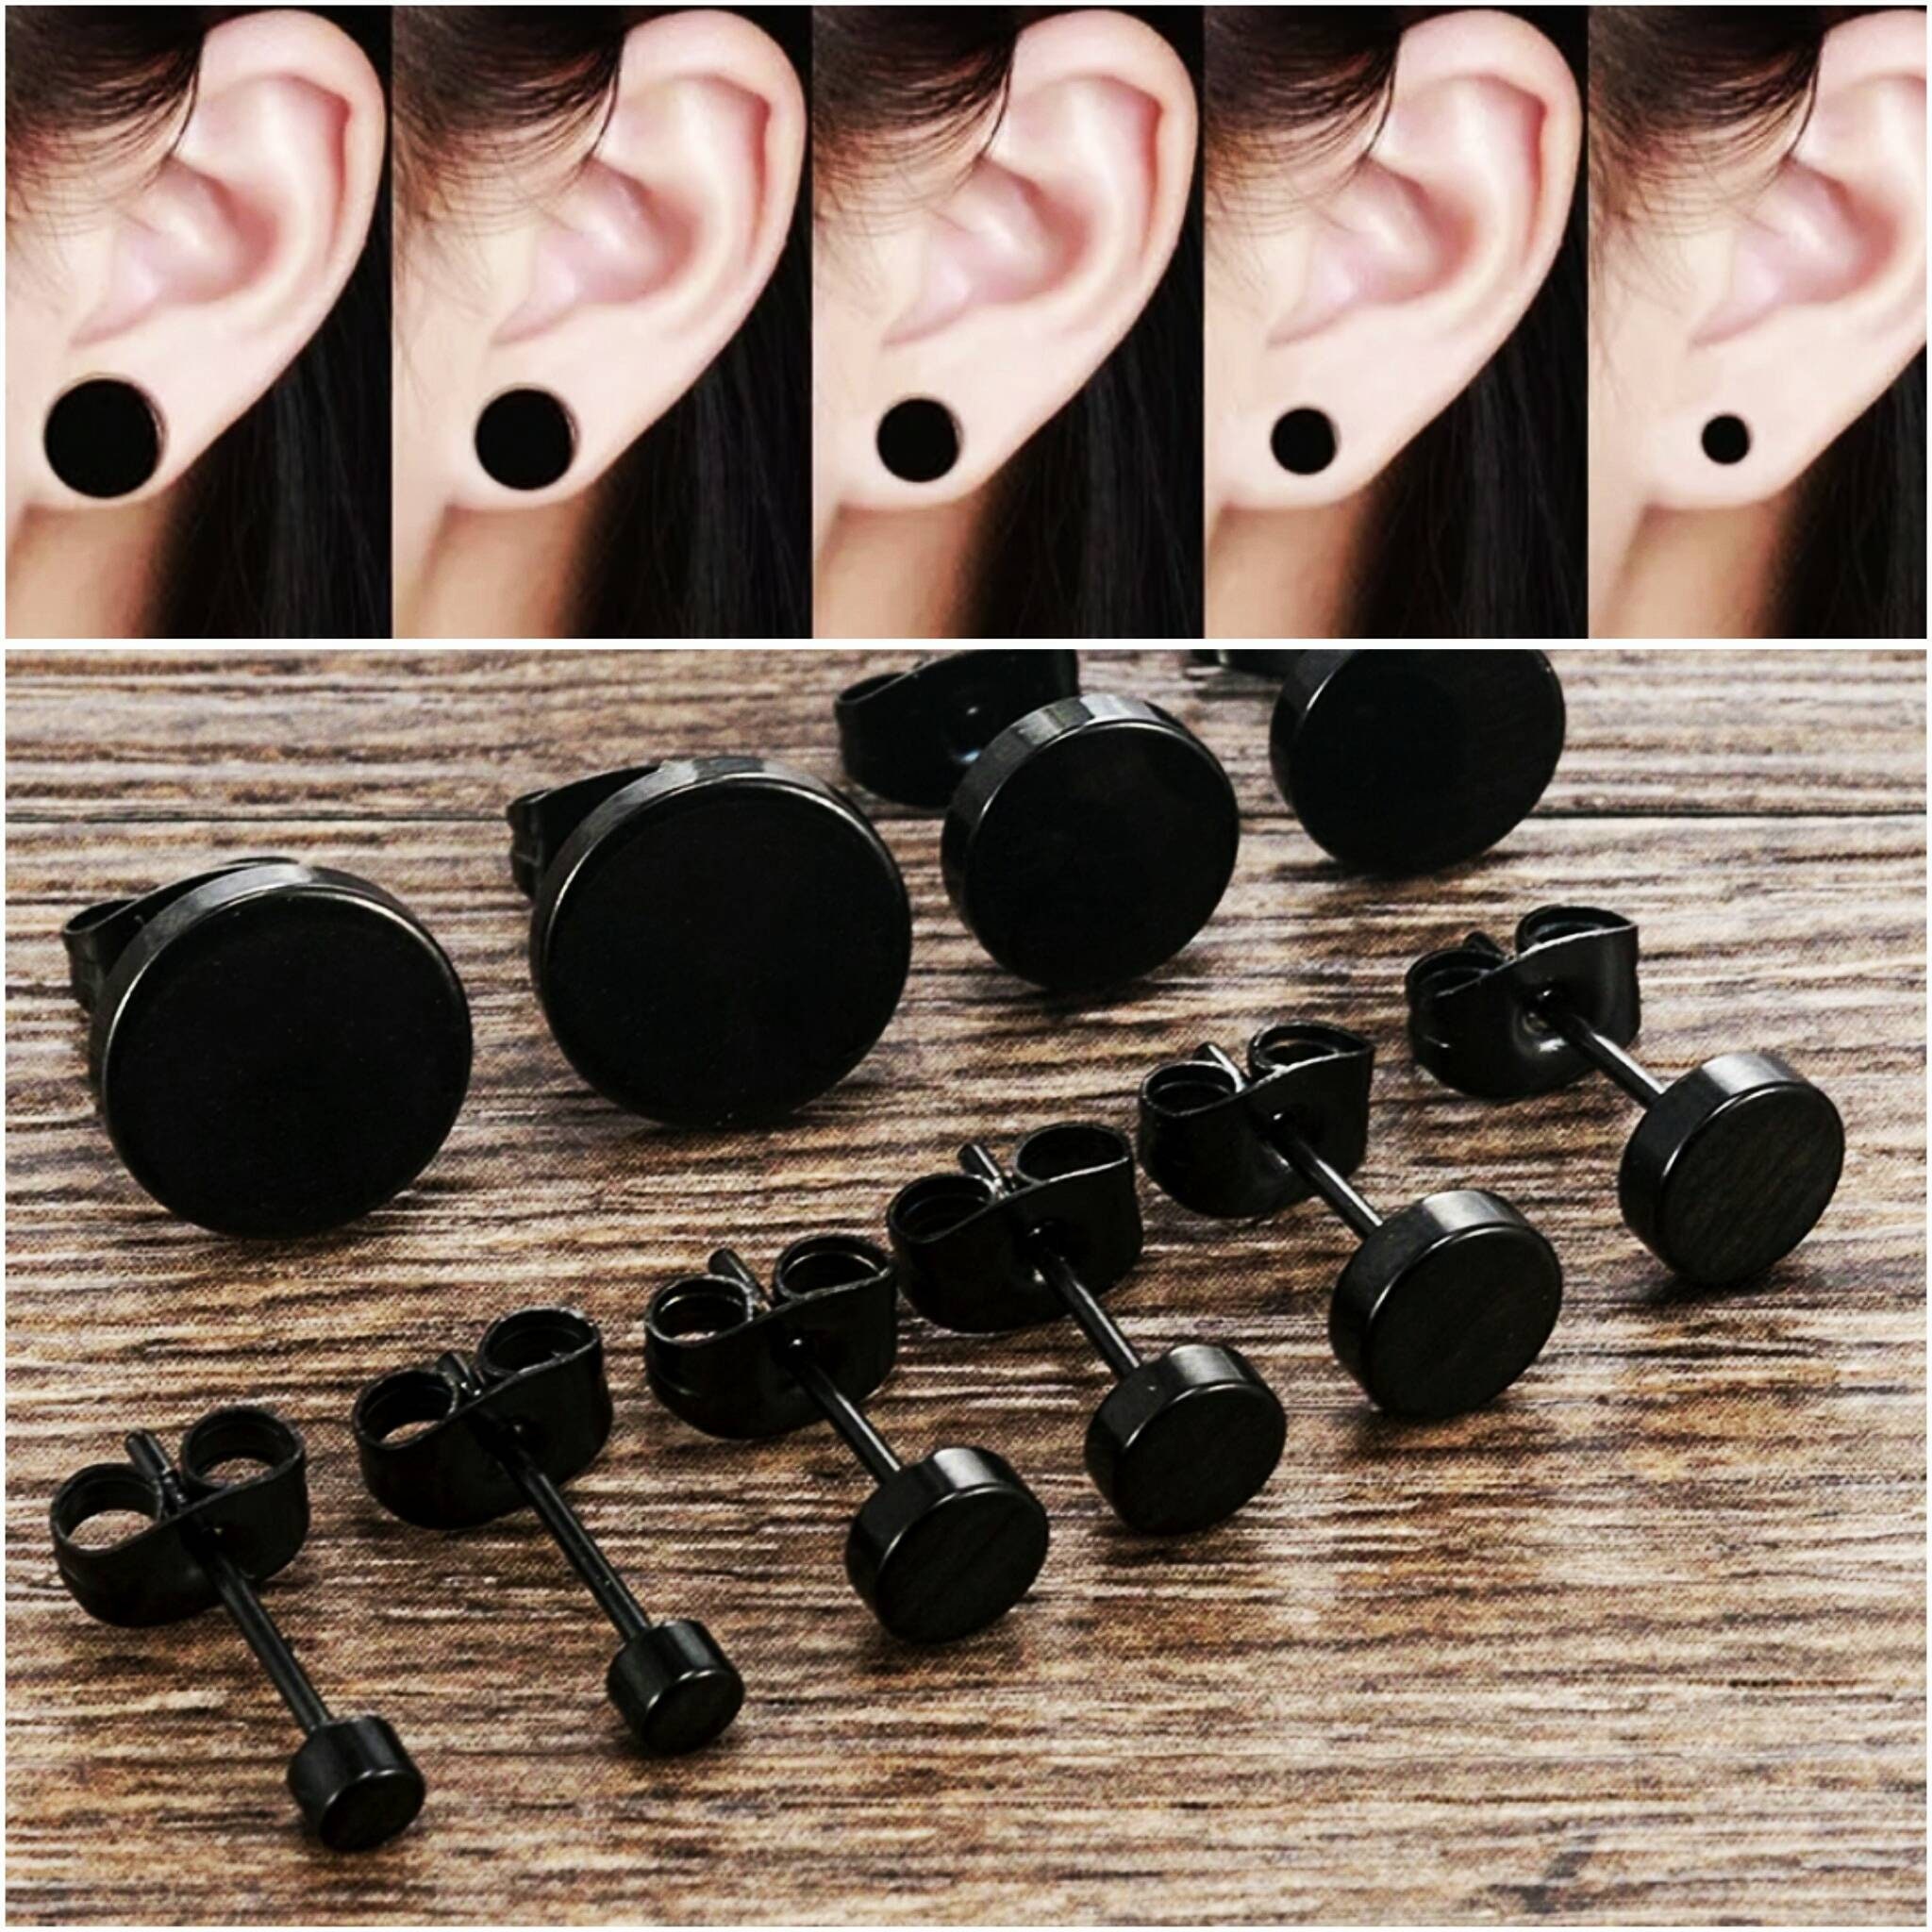 Pair of Black Studs Earrings Made of Surgical Stainless Steel - Etsy